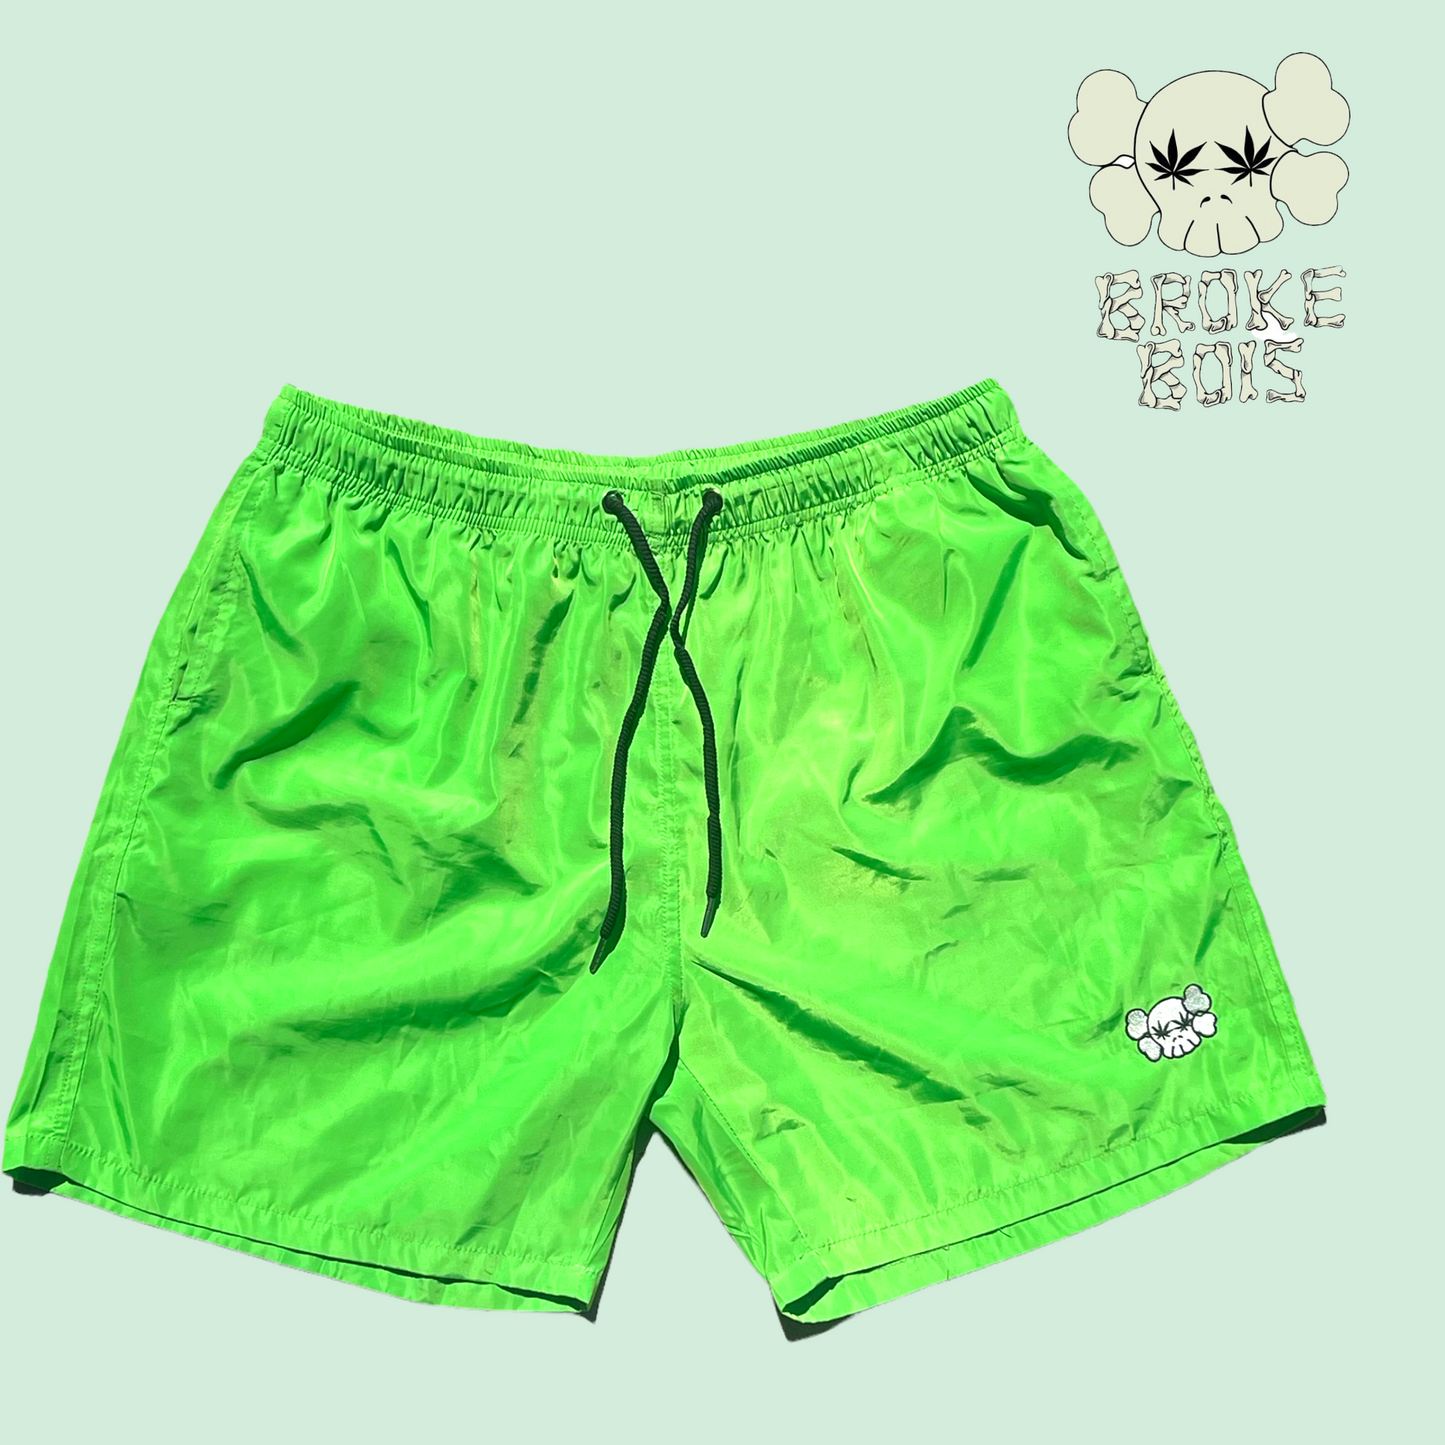 BrokeBois - Stoned to the Dome Shorts